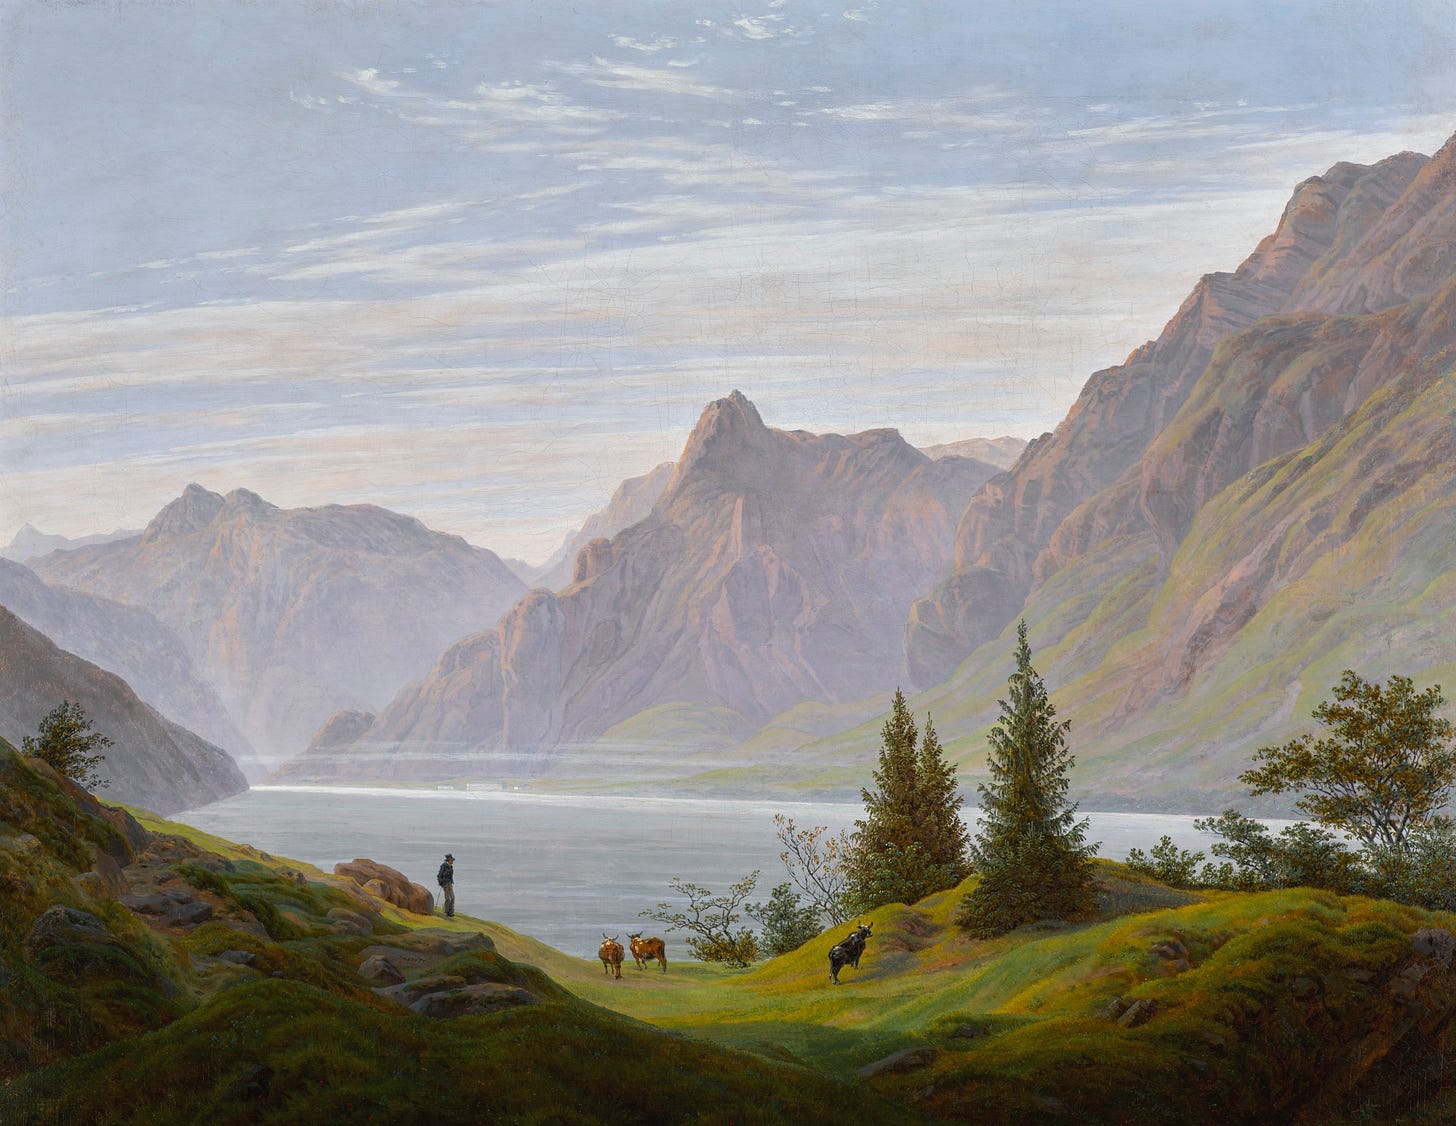 Painting of a lake in the middle of a mountain range, with the morning light brightening the scene. Three steer - two brown and one black - gather near the edge as their handler stands by, contemplatively.